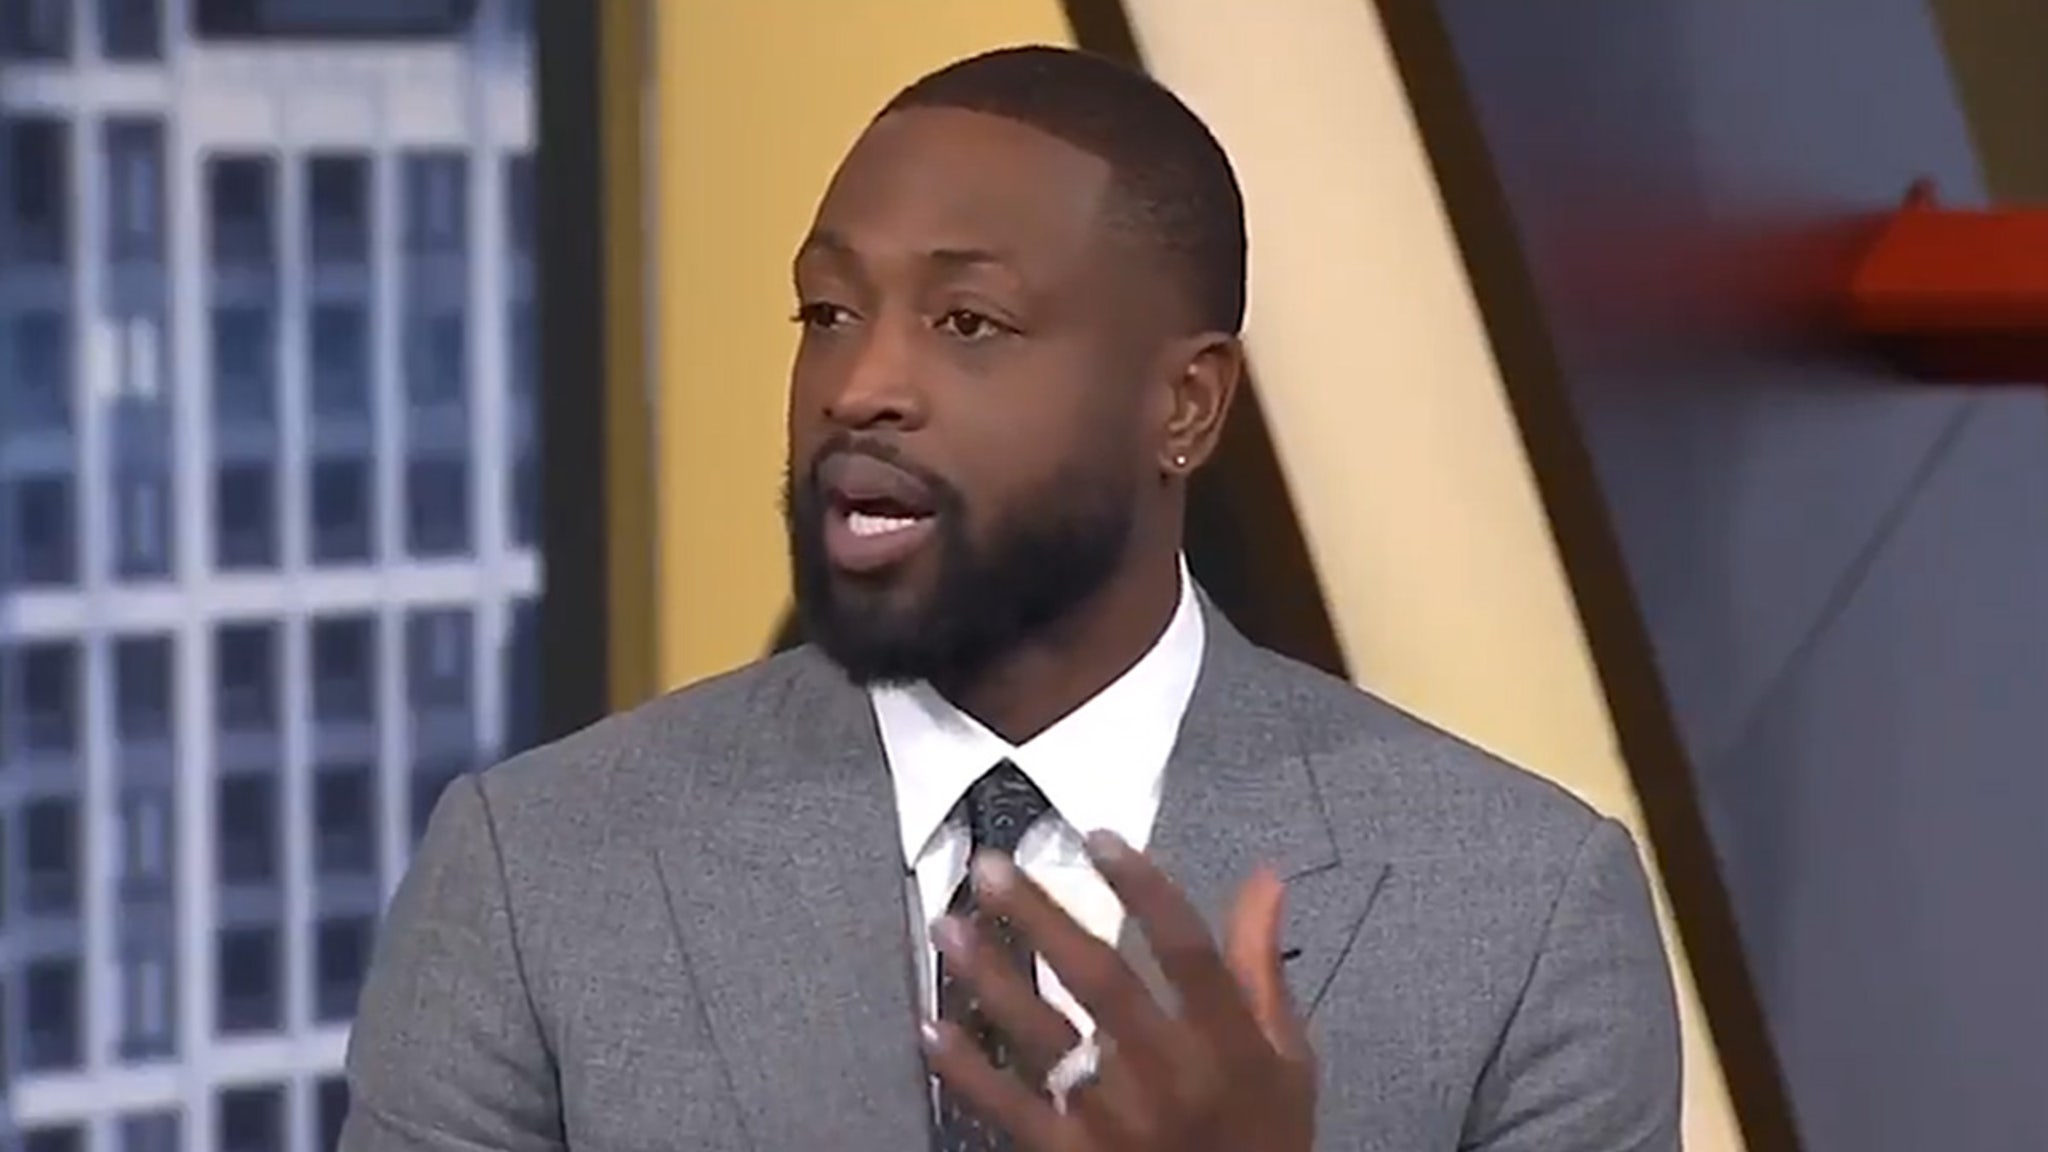 Dwyane Wade On 'Great Day' with Tiger Woods Day Before Crash, We Talked ...